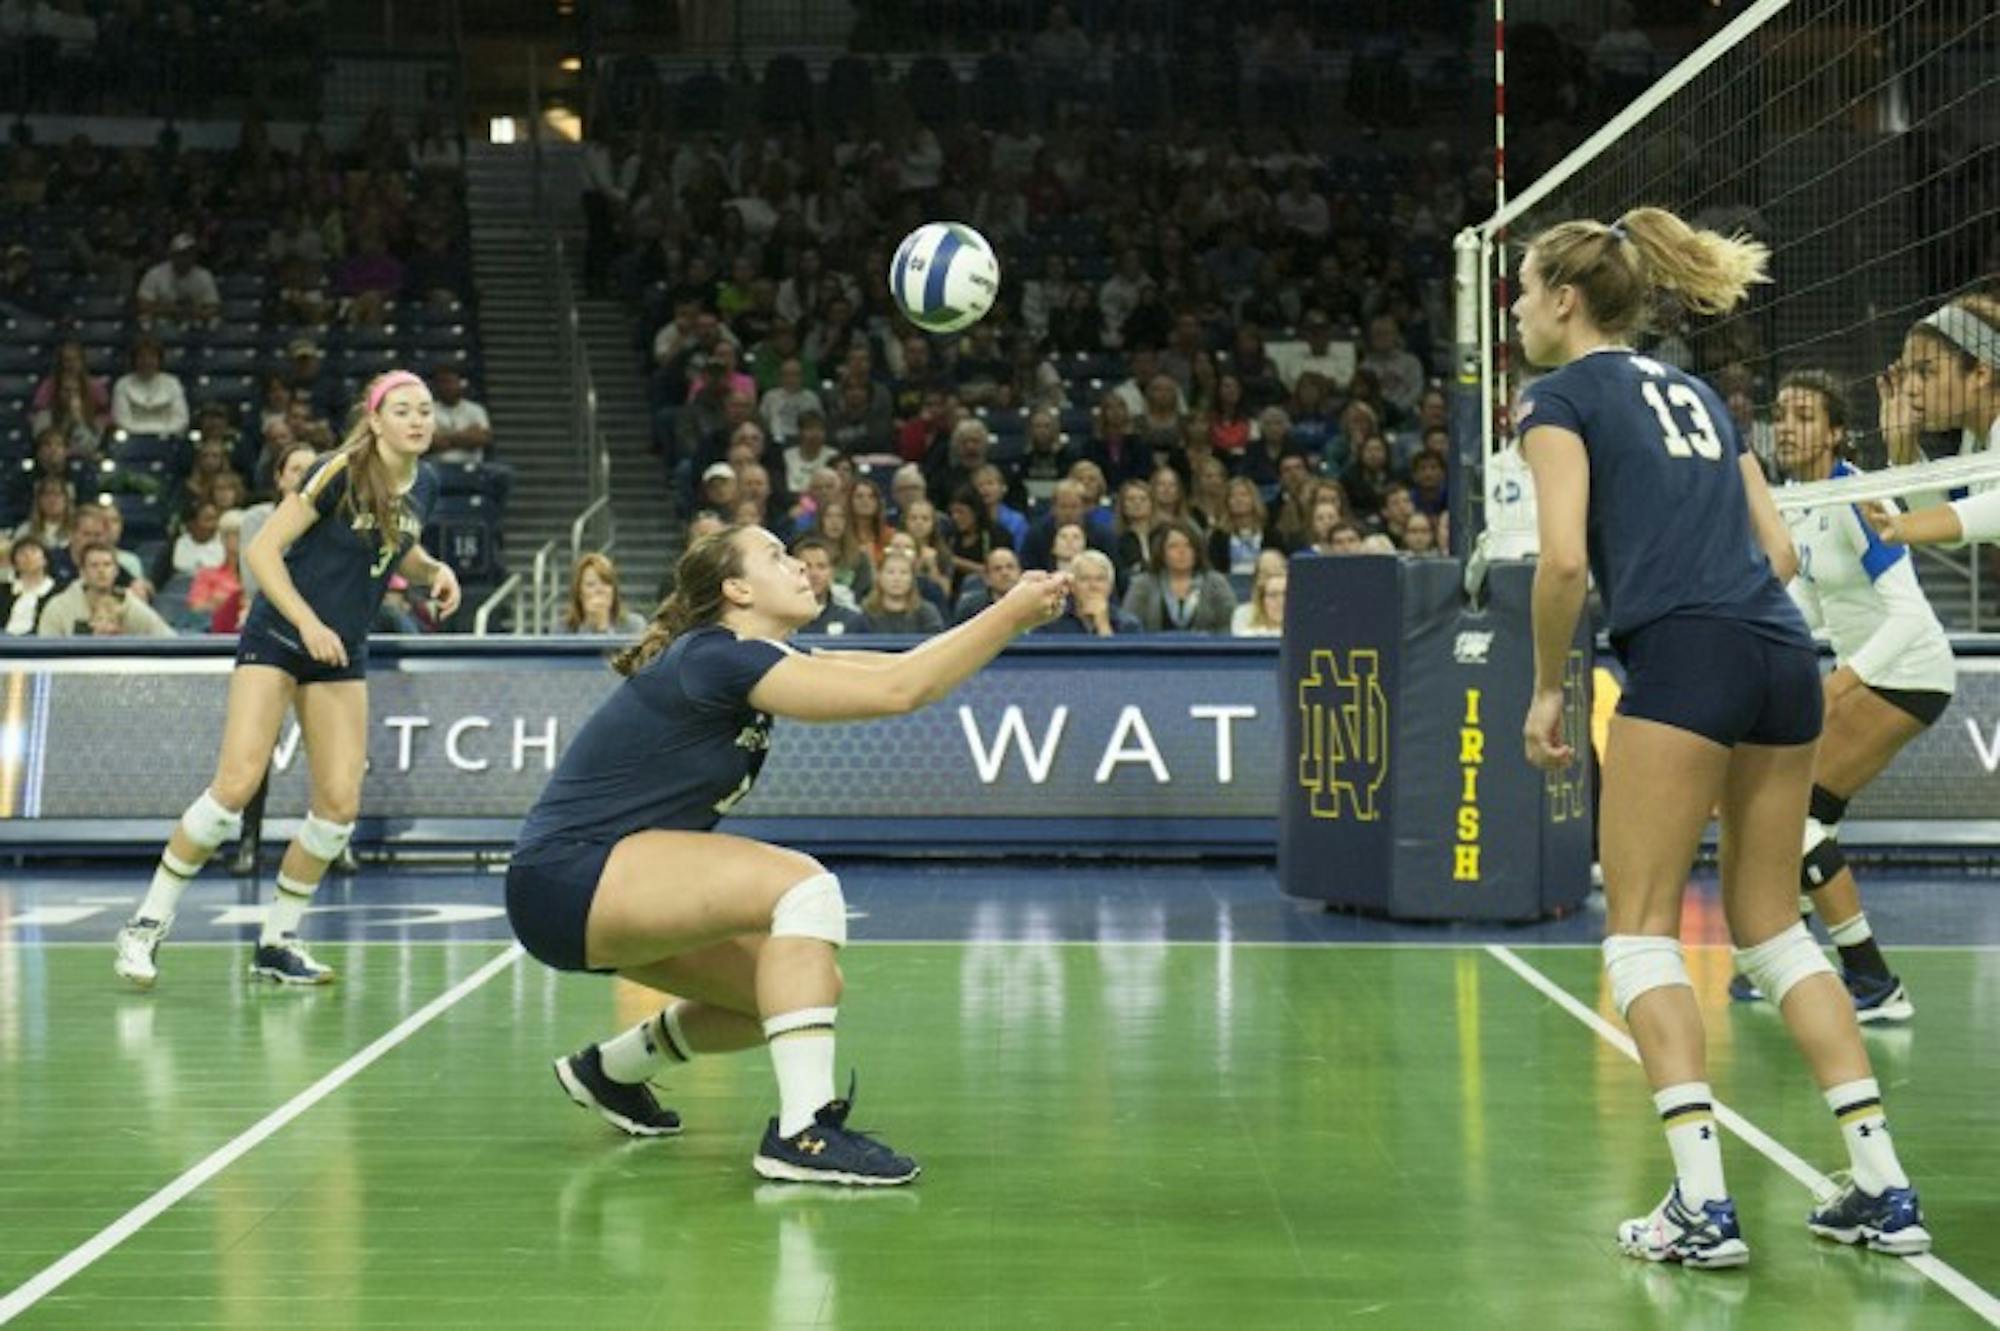 Irish senior middle blocker Jeni Houser digs a shot during Notre Dame’s 3-1 loss to Duke on Sunday at Purcell Pavilion. Houser is second on the team in kills per set.